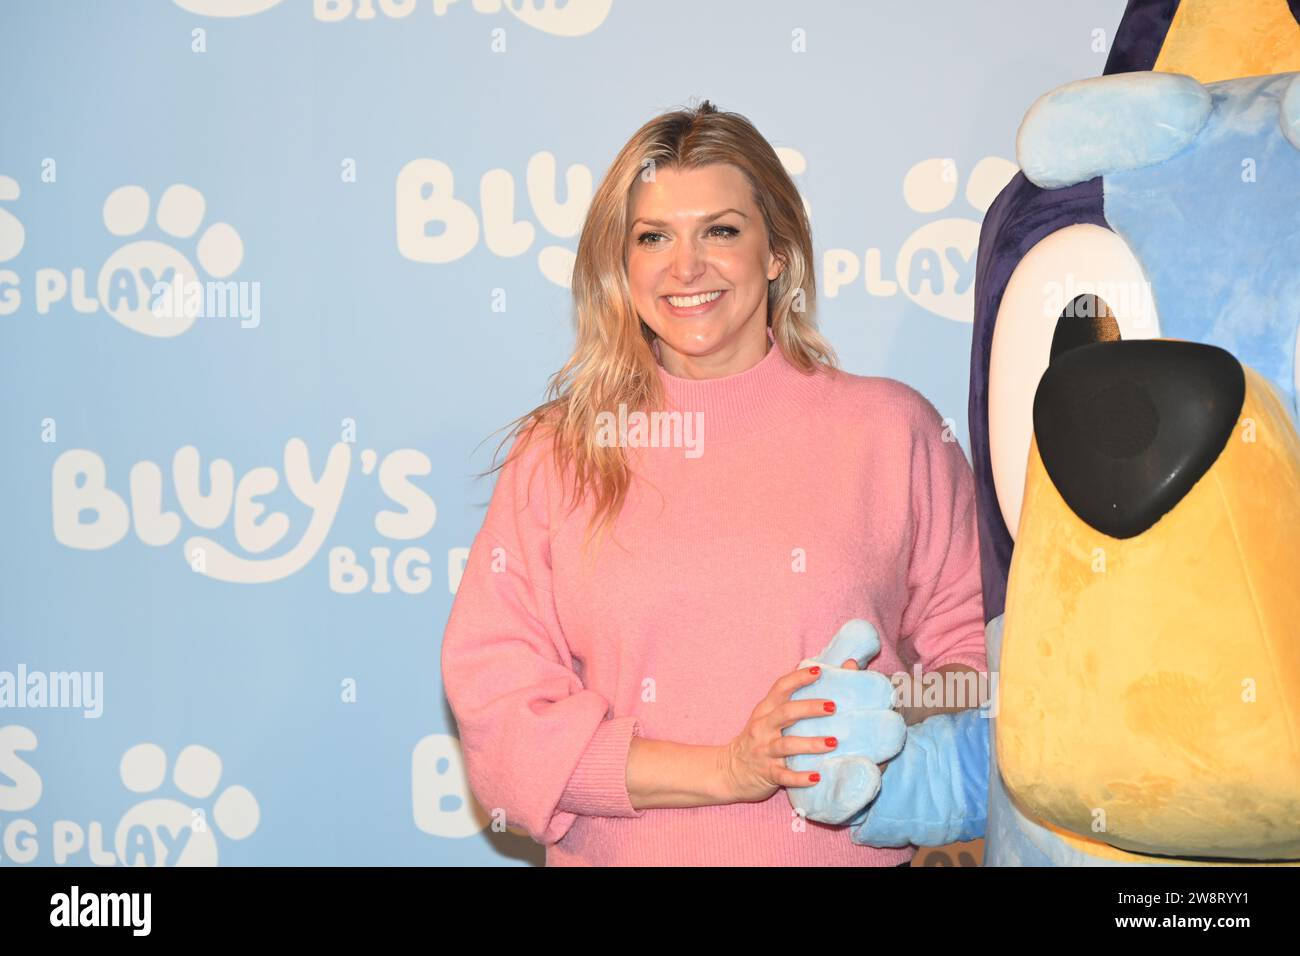 London, UK. 21th December 2023. Anna Williamson attends Gala Performance Bluey's Big Play at Southbank Centre’s Royal Festival Hall, London, UK. Stock Photo